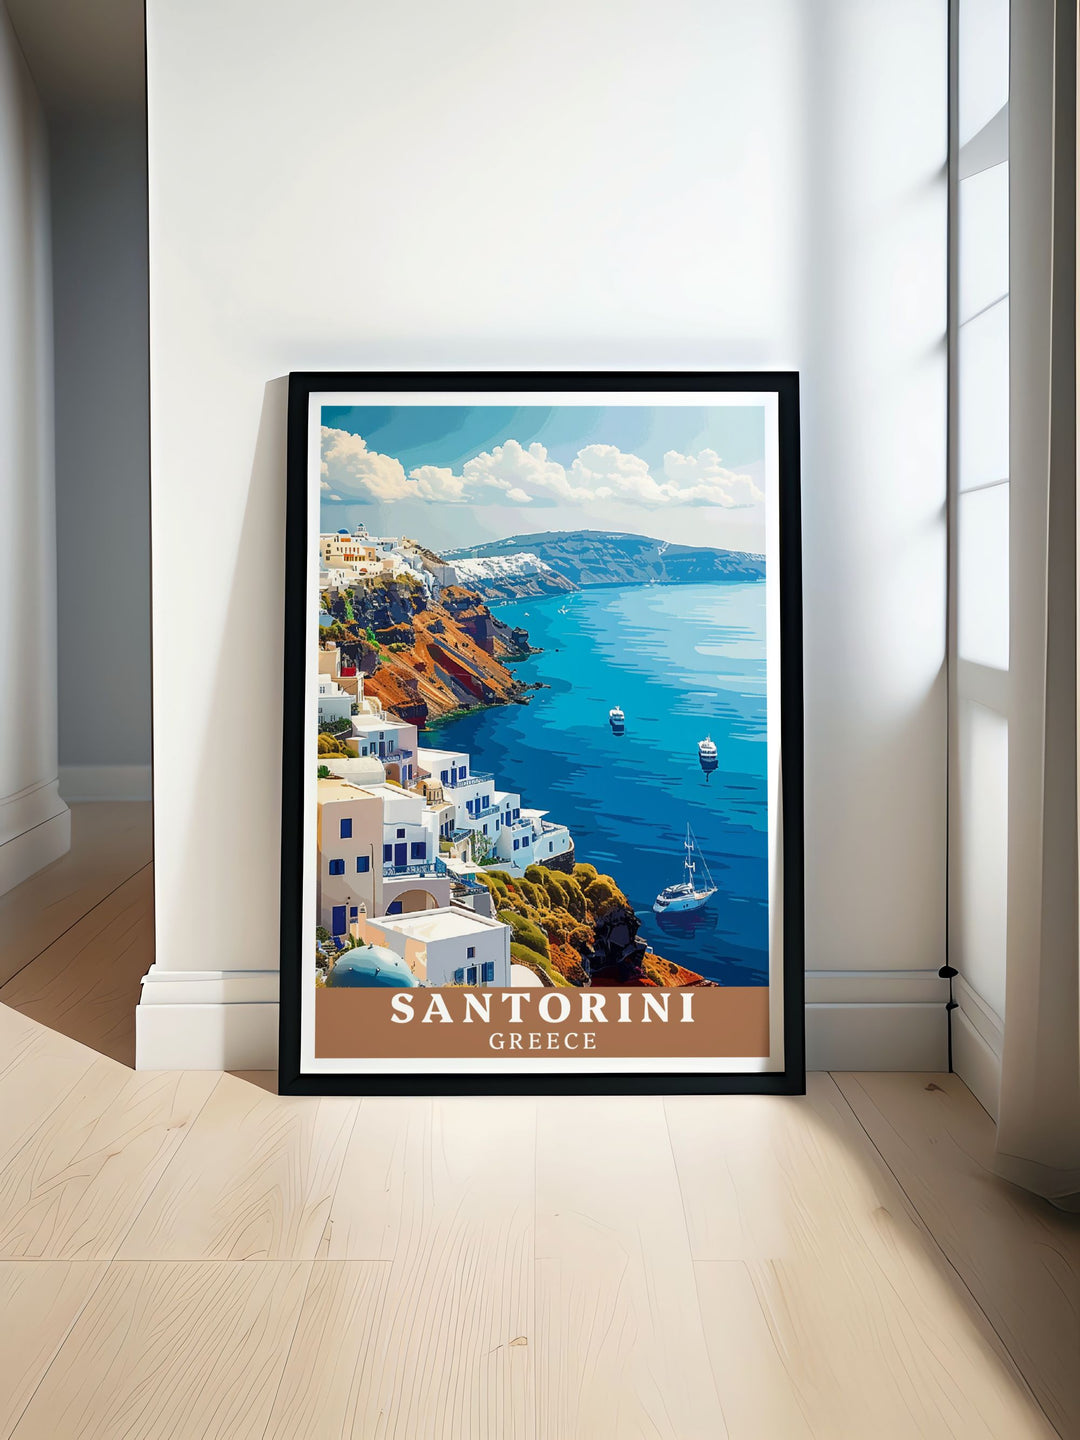 Detailed illustration of Fira, Santorini, highlighting its picturesque scenery and historic charm. Perfect for any Greece inspired art collection or home decor.